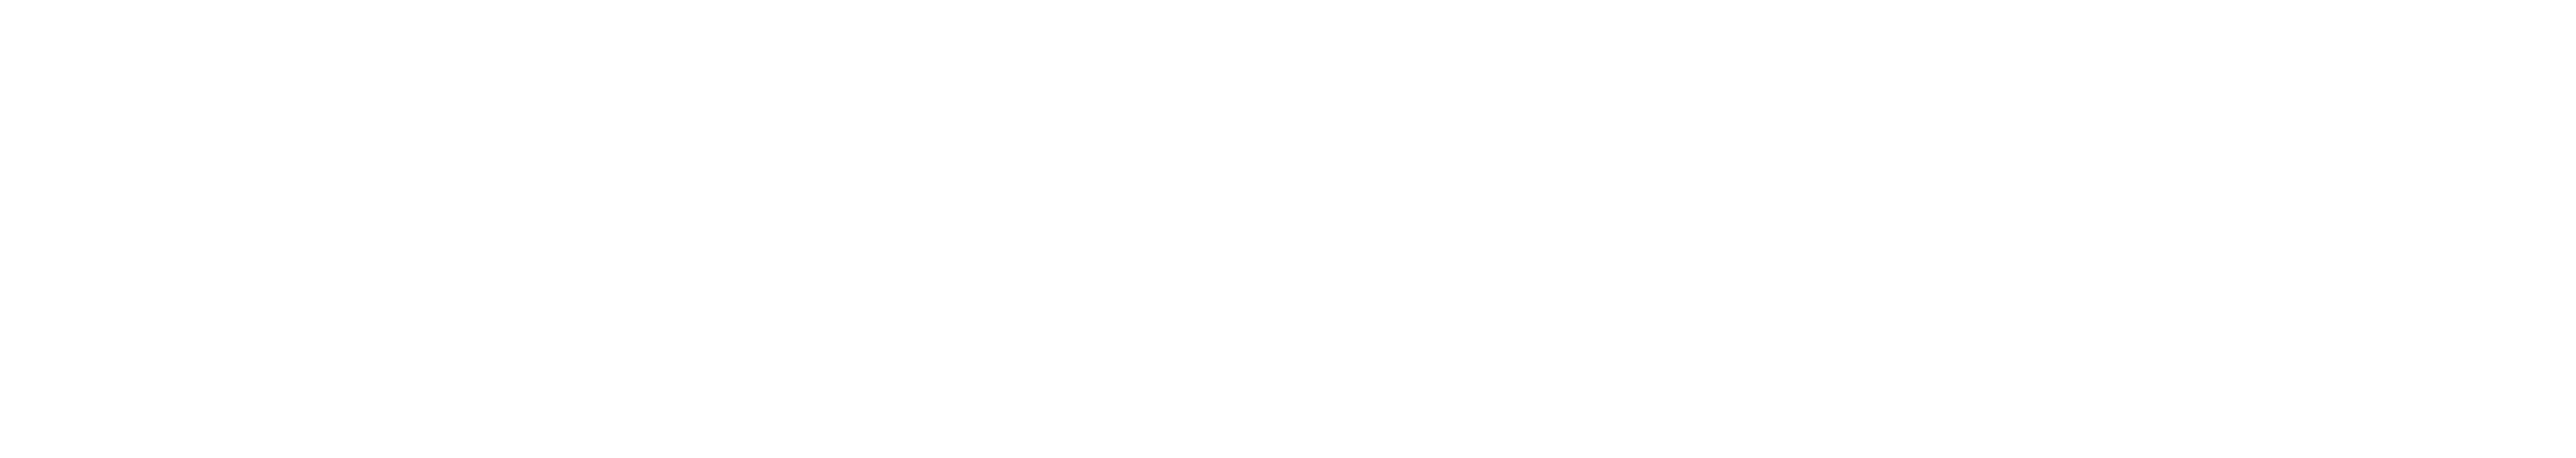 Utah Department of Health & Human Services - Integrated Healthcare